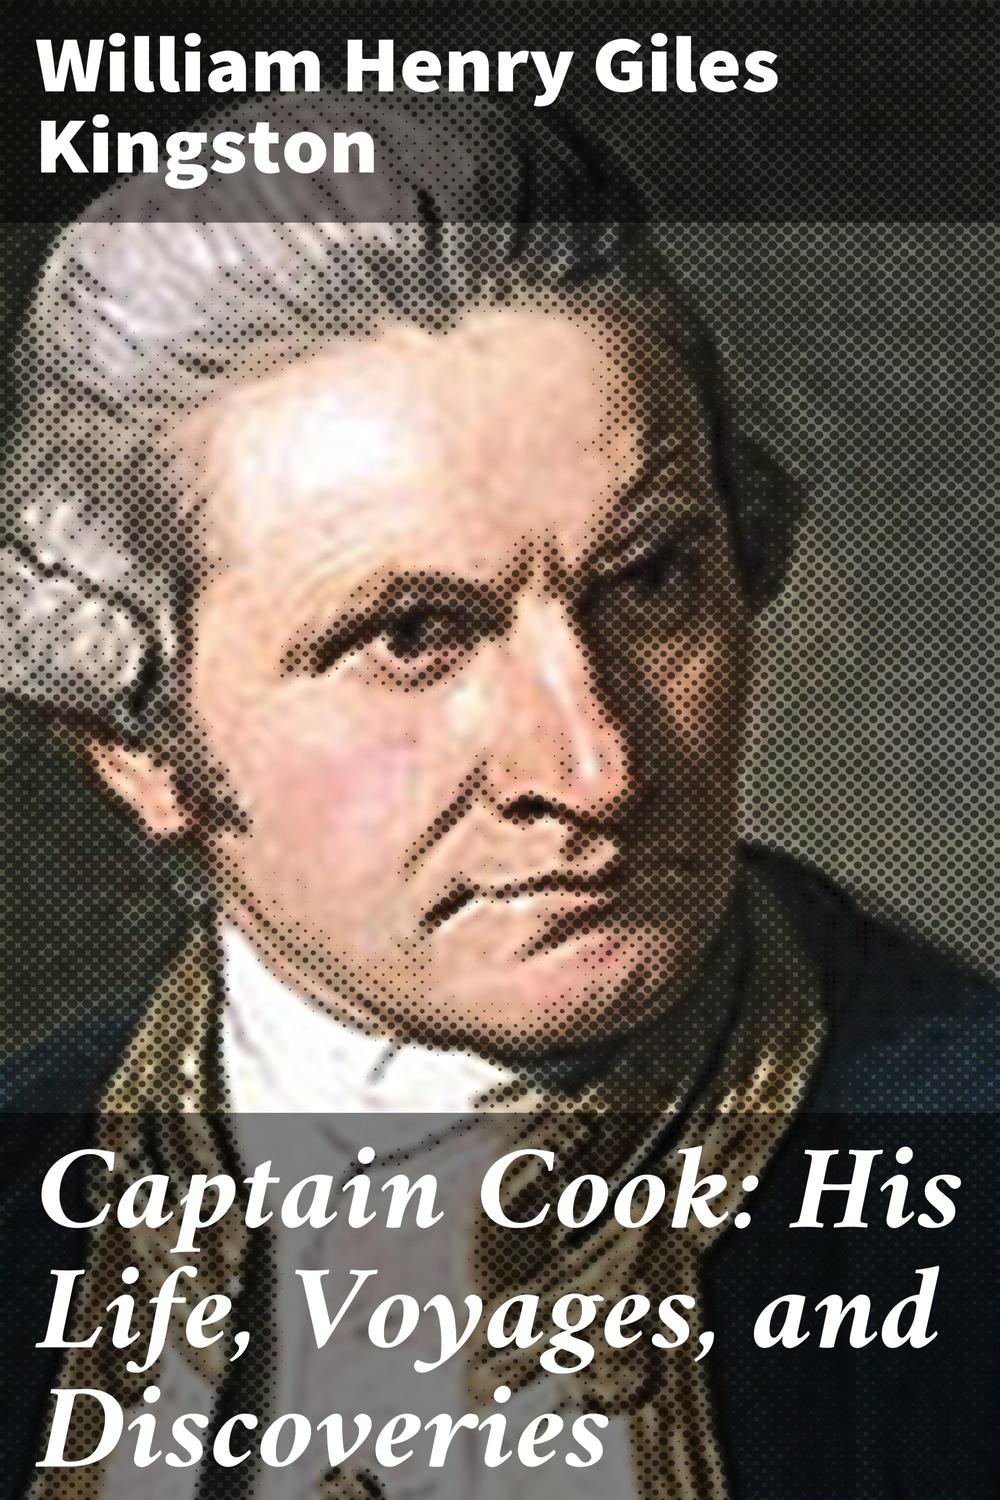 Captain Cook: His Life, Voyages, and Discoveries - William Henry Giles Kingston